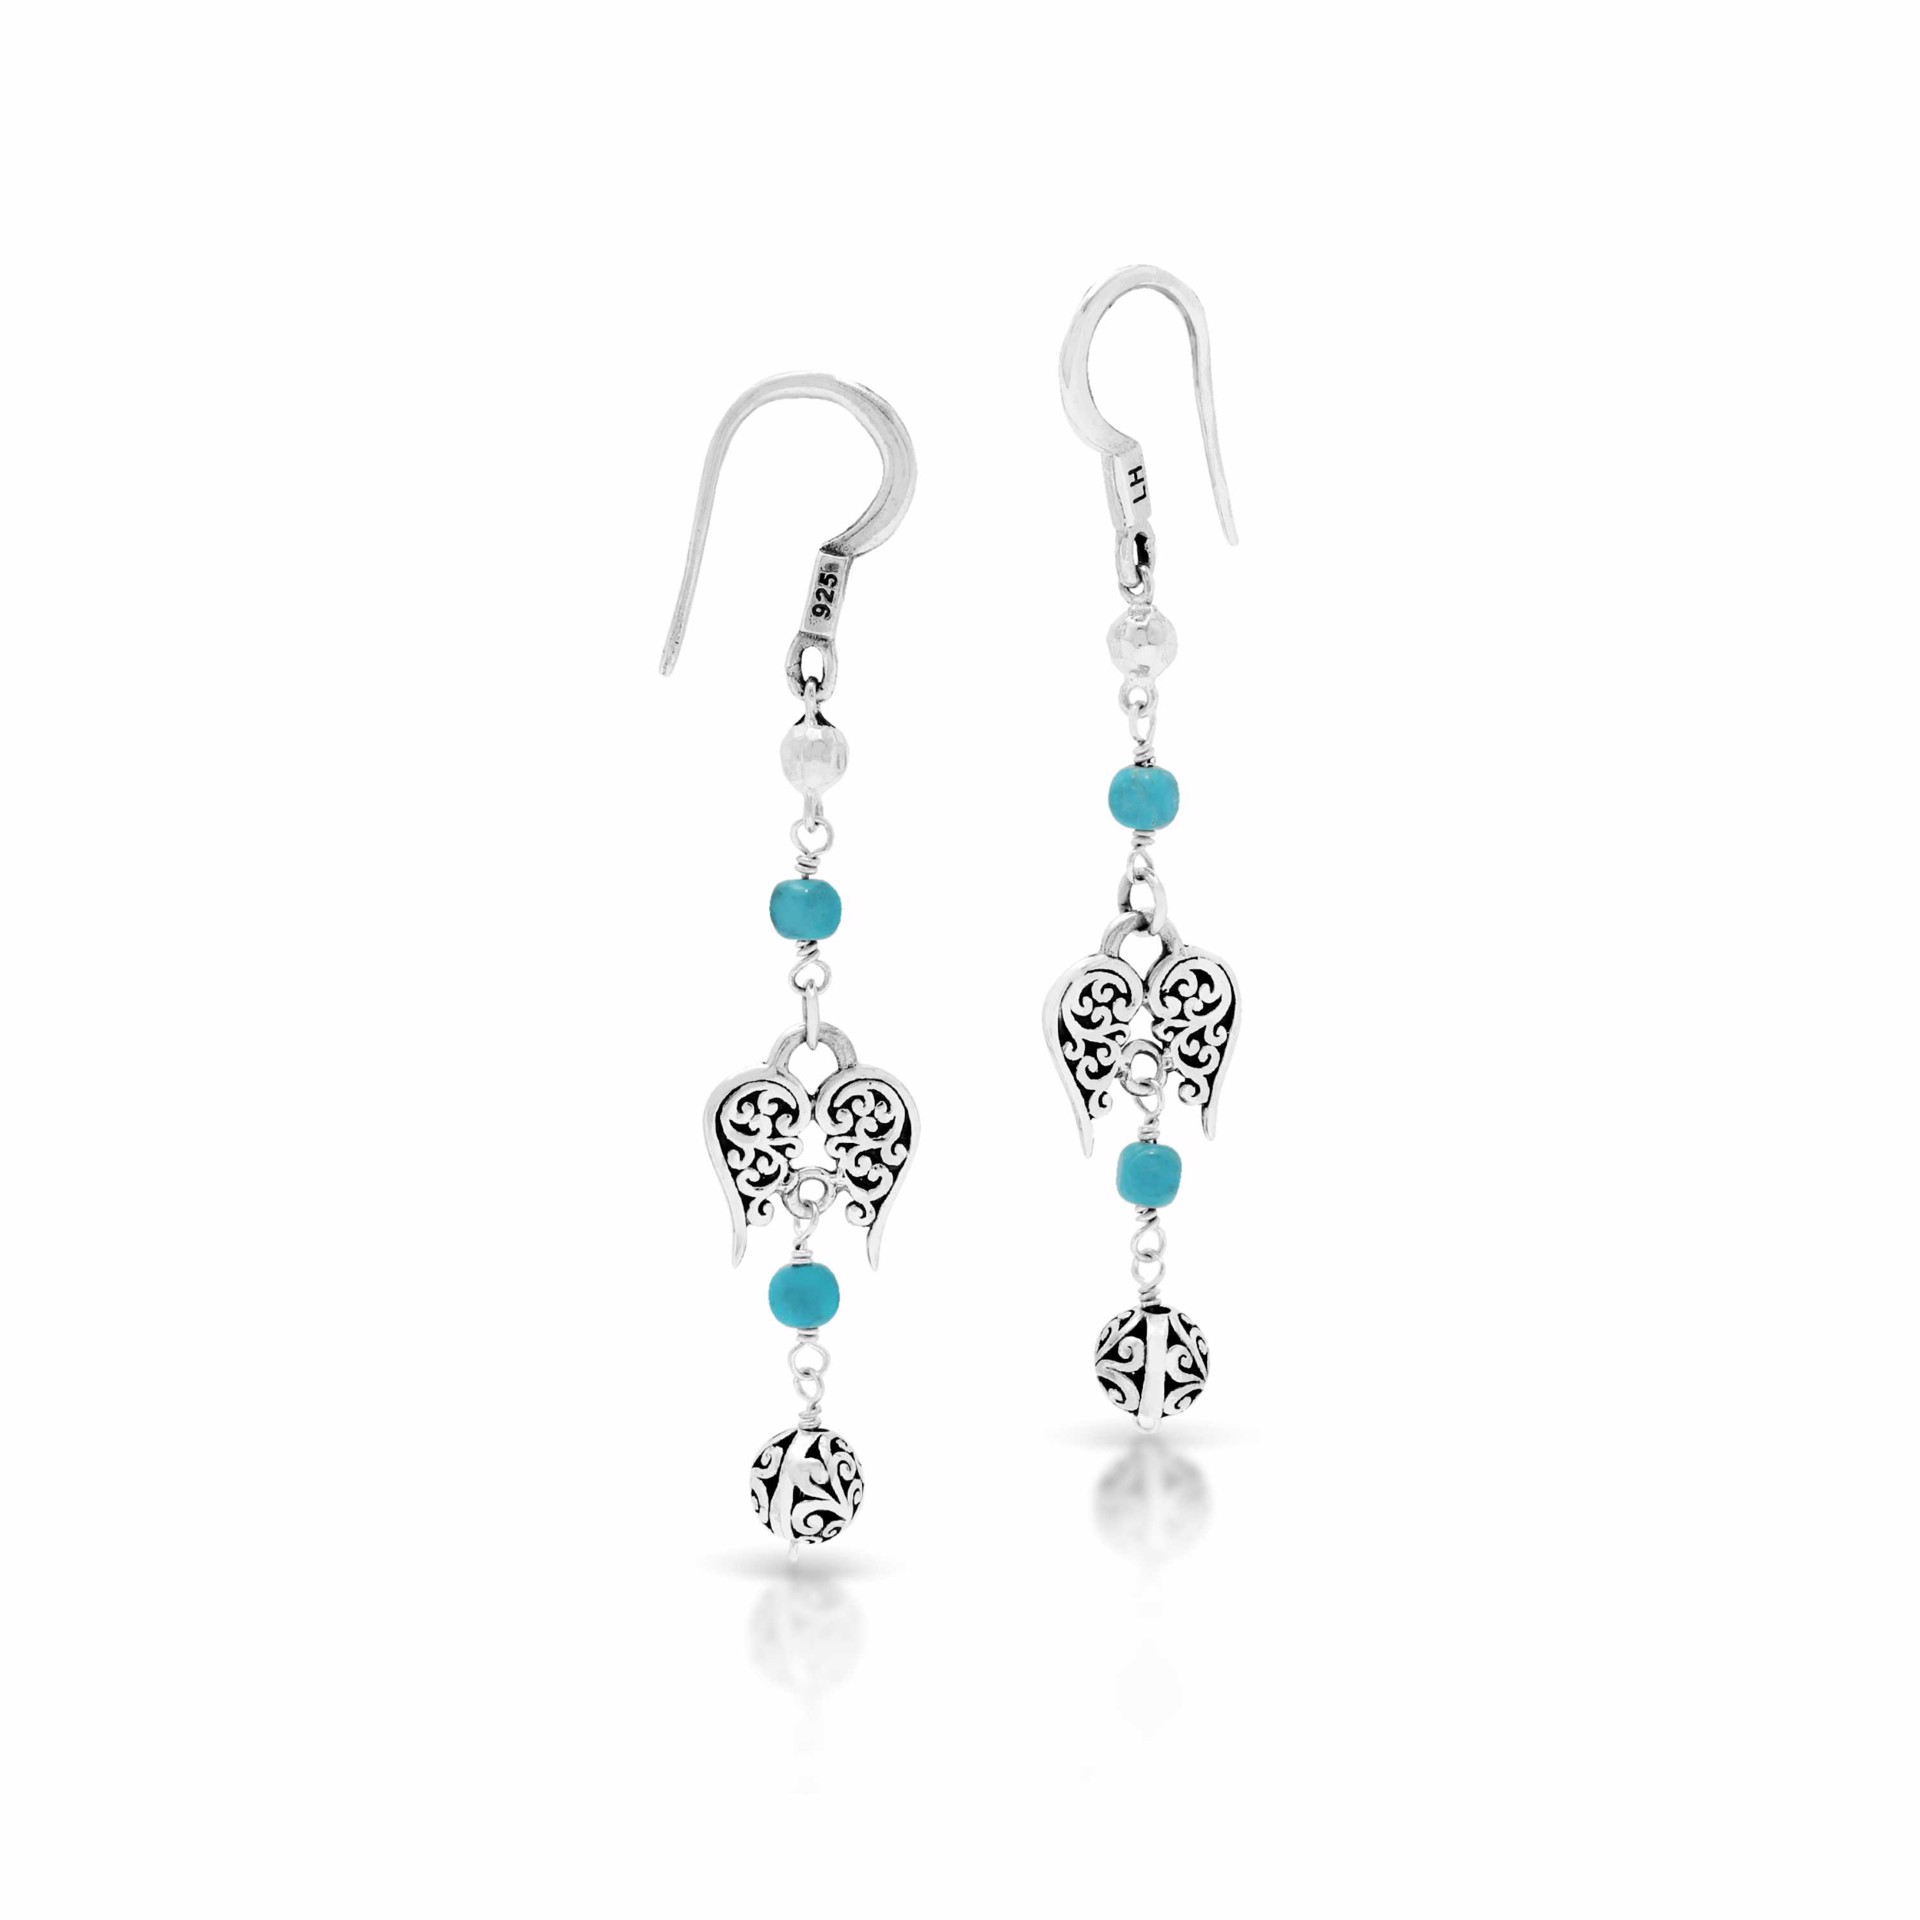 9702 Sterling Silver Drop Earrings with Signature Scroll Pattern and Angel Wings with Turquoise Beads by Lois Hill